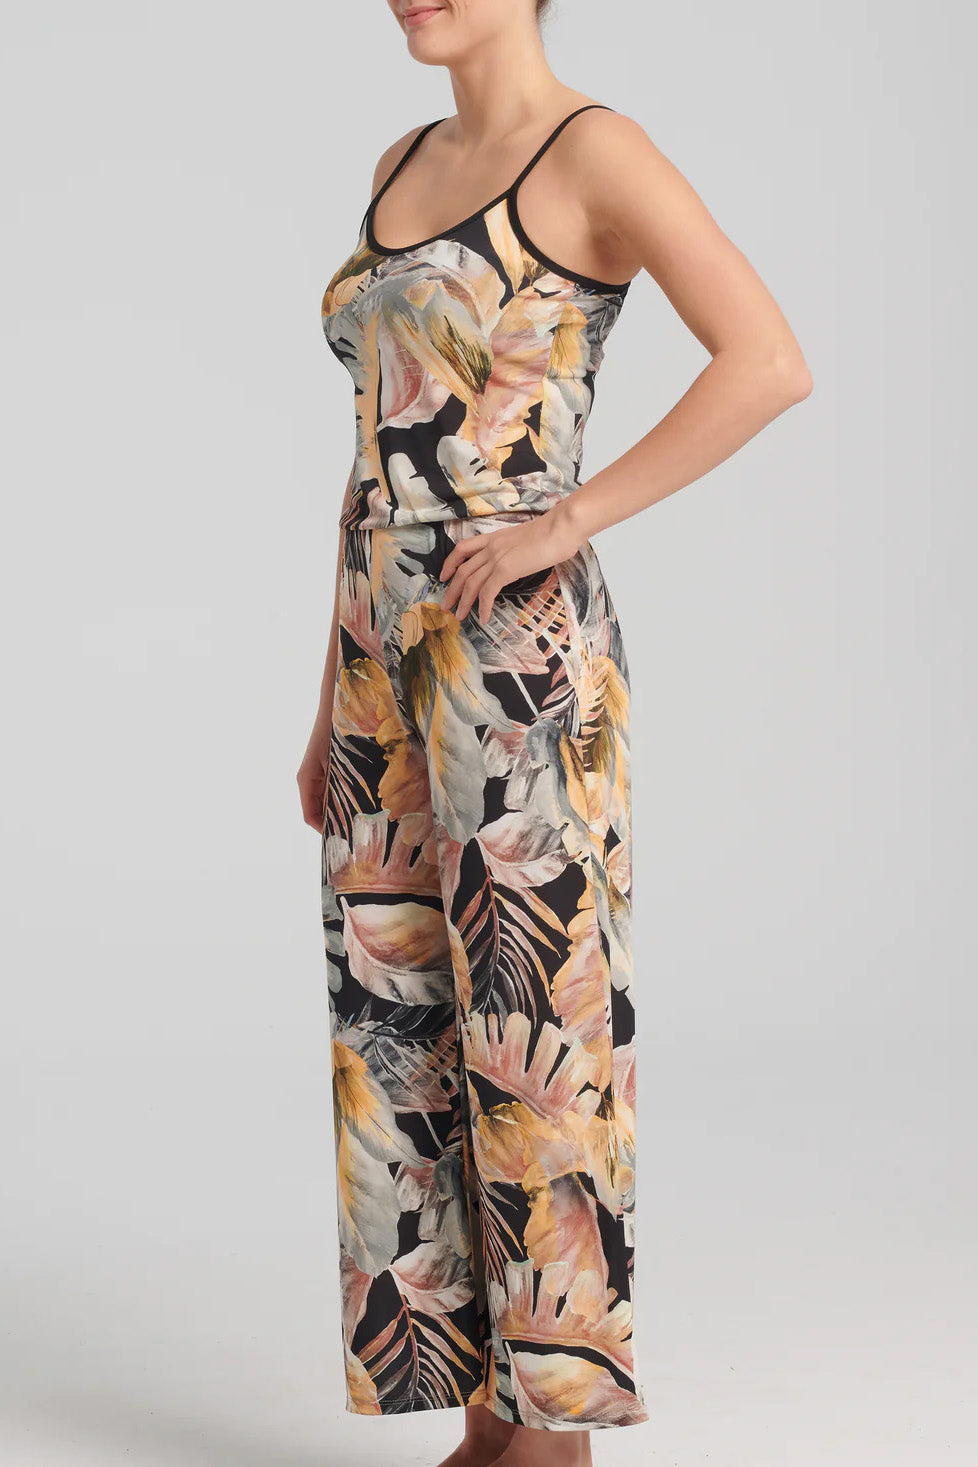 Nephele Jumpsuit by Kollontai, side view, neutral toned tropical print, black piping at neckline and  spaghetti straps, bloused effect at waist, sizes XS to XL, made in Quebec